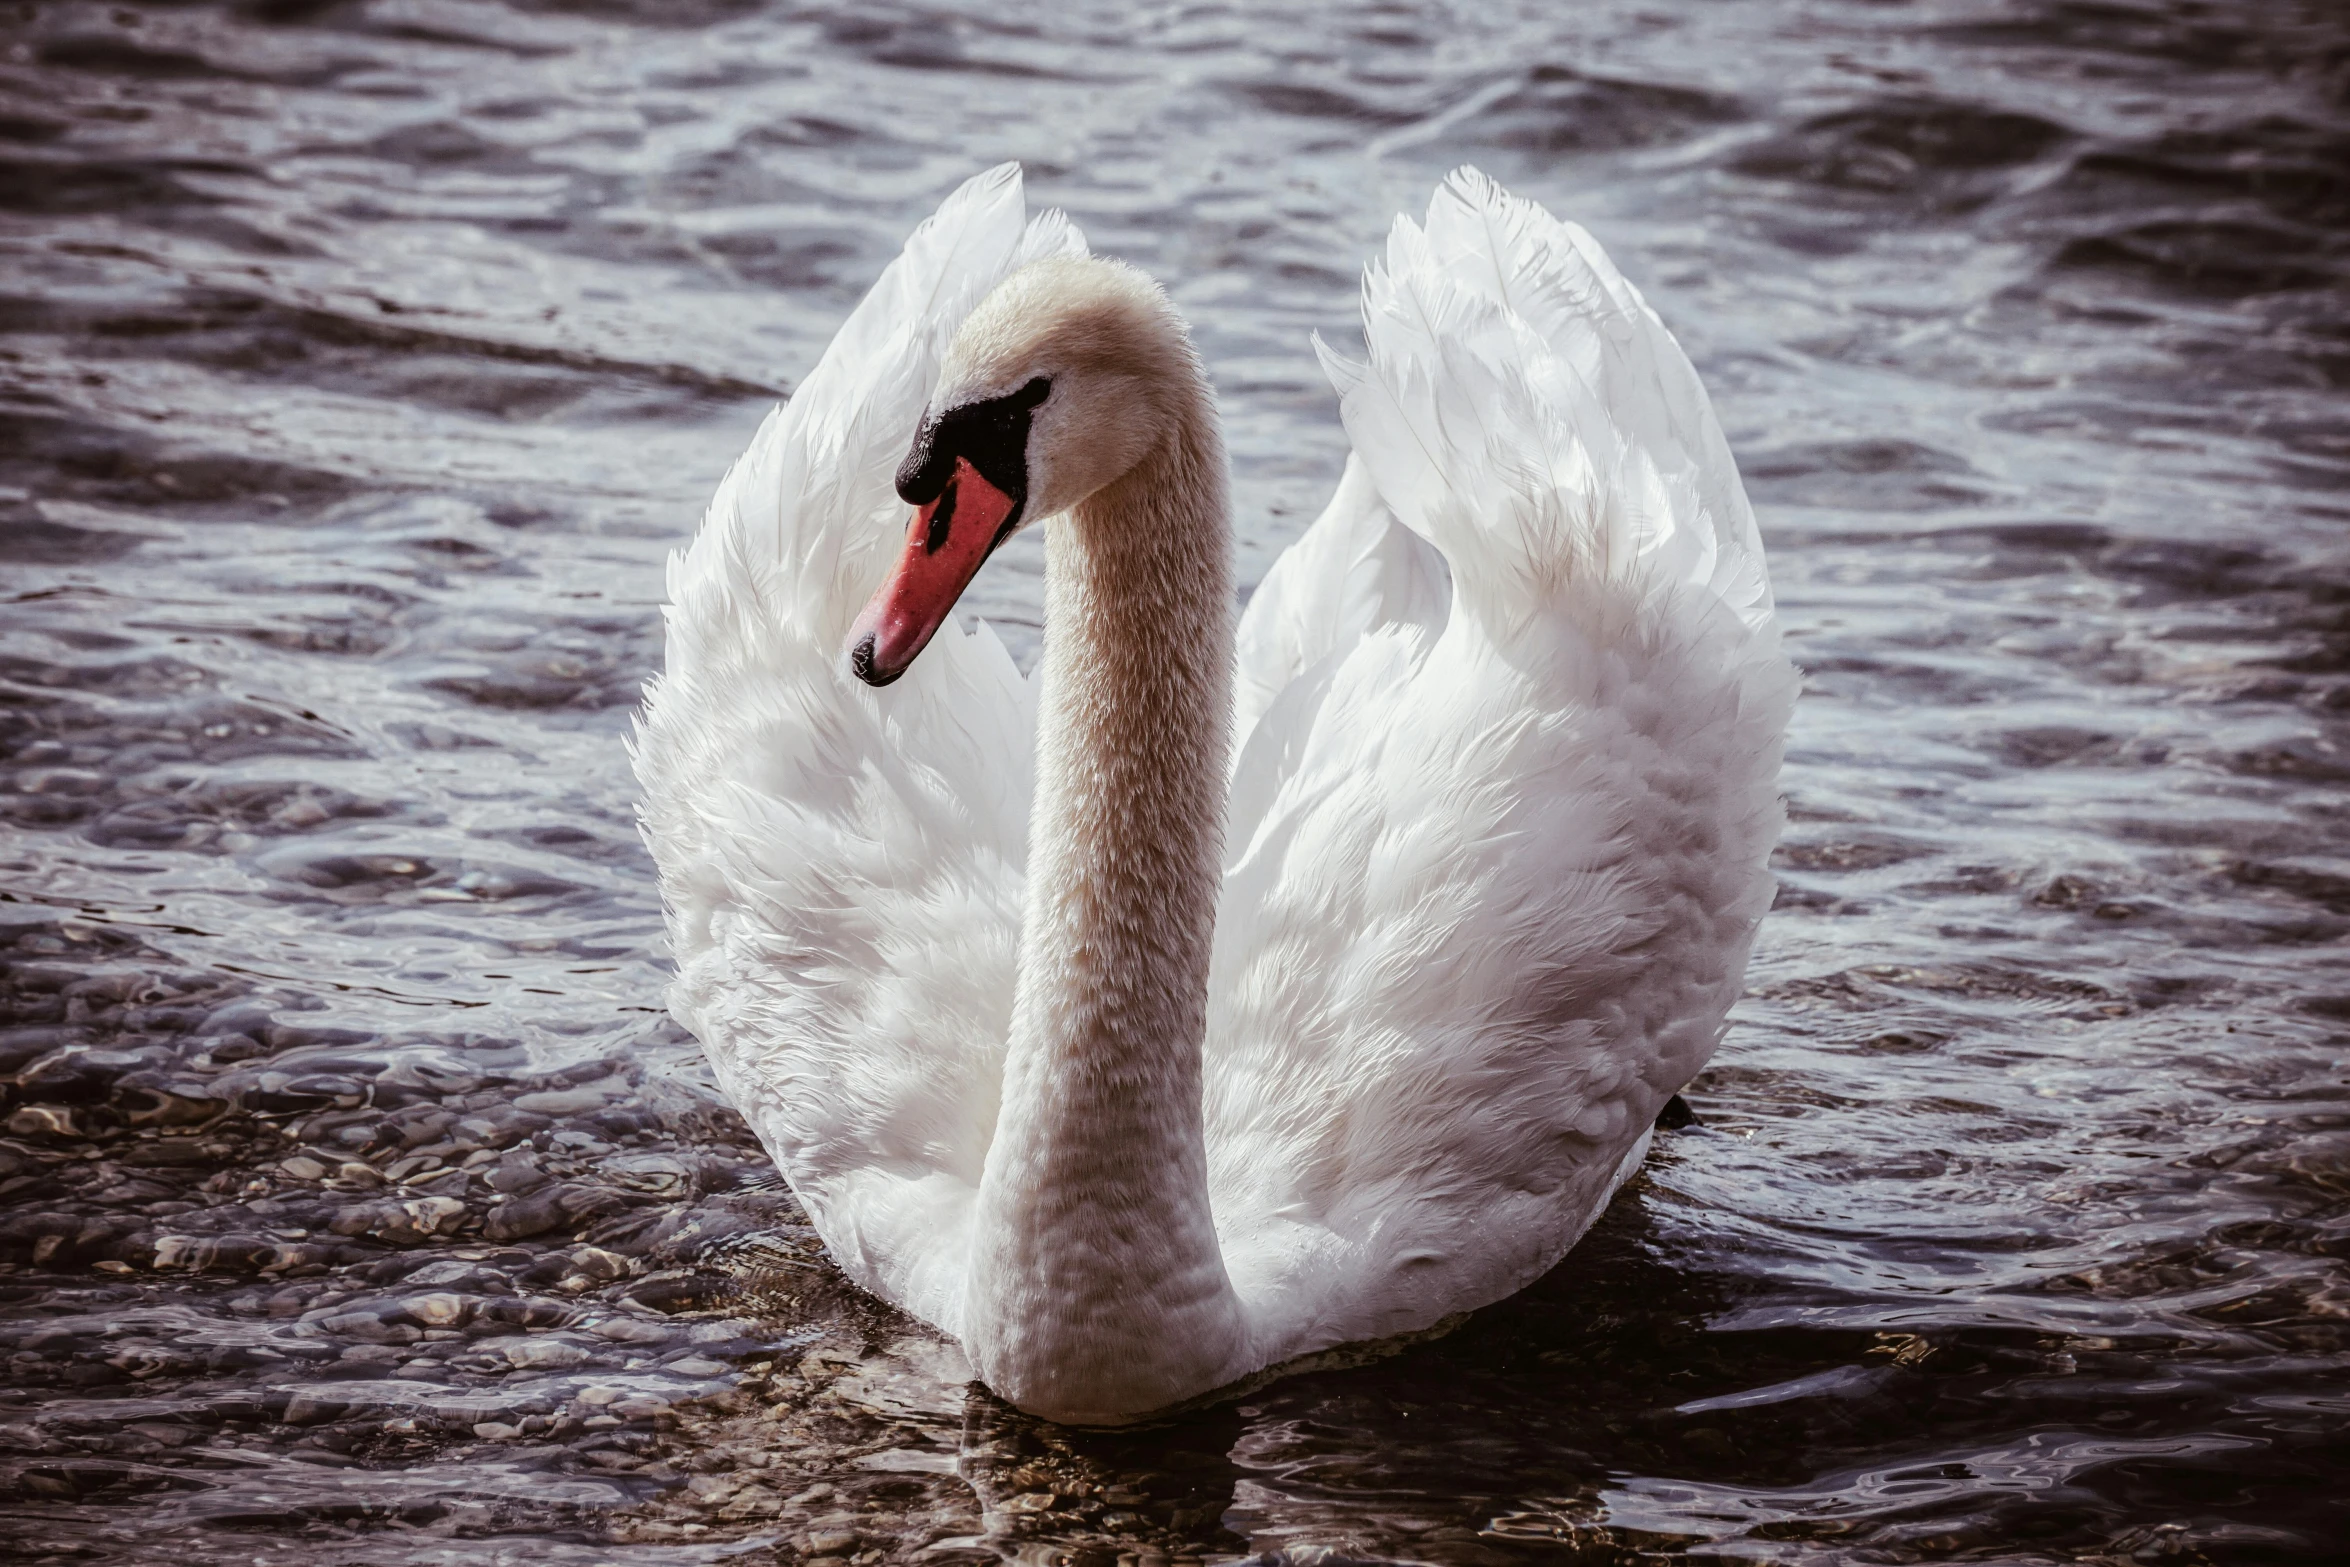 a swan swimming on a body of water